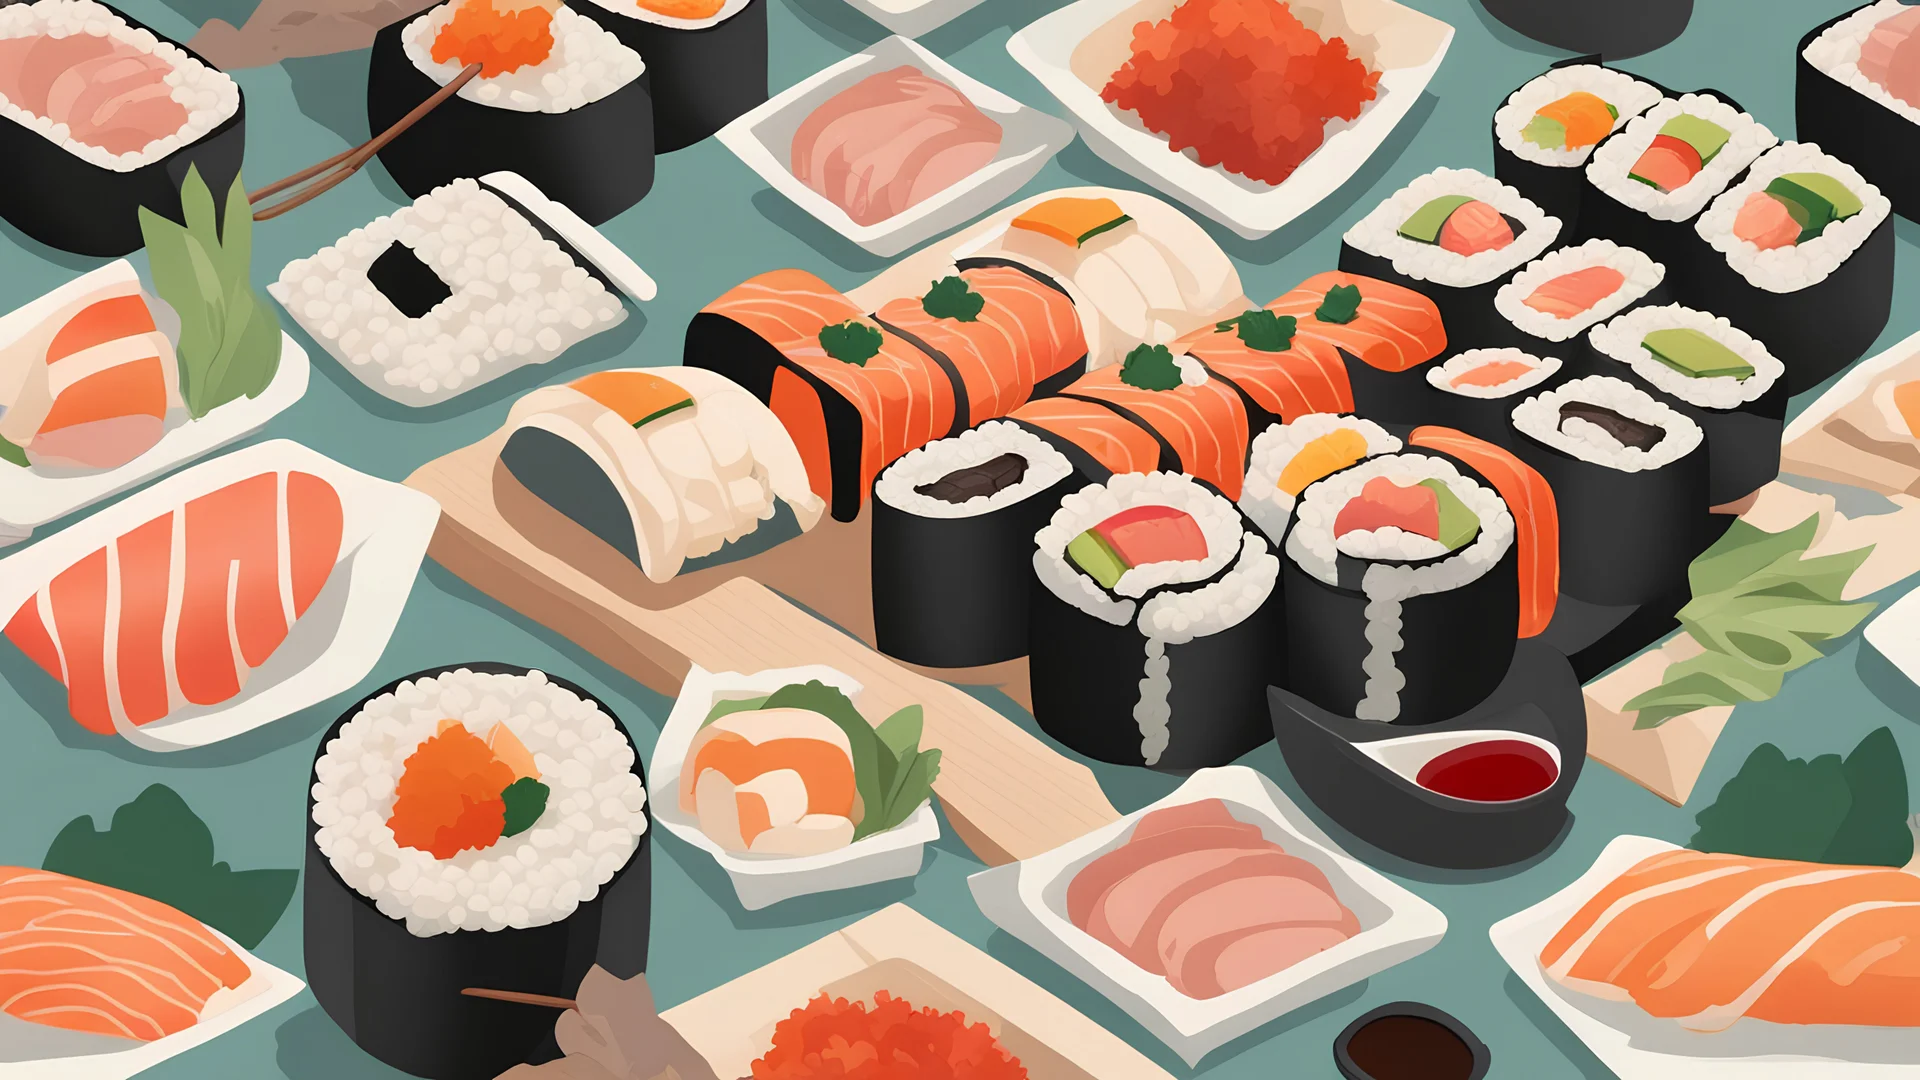 "An image of a sushi dish ready for serving, showcasing its vibrant colors and diverse ingredients. The details of the rice, fish, and vegetables are portrayed realistically, making you feel as if you're dining in an upscale Japanese restaurant. The harmonious blend of colors creates an artistic masterpiece worthy of savoring."